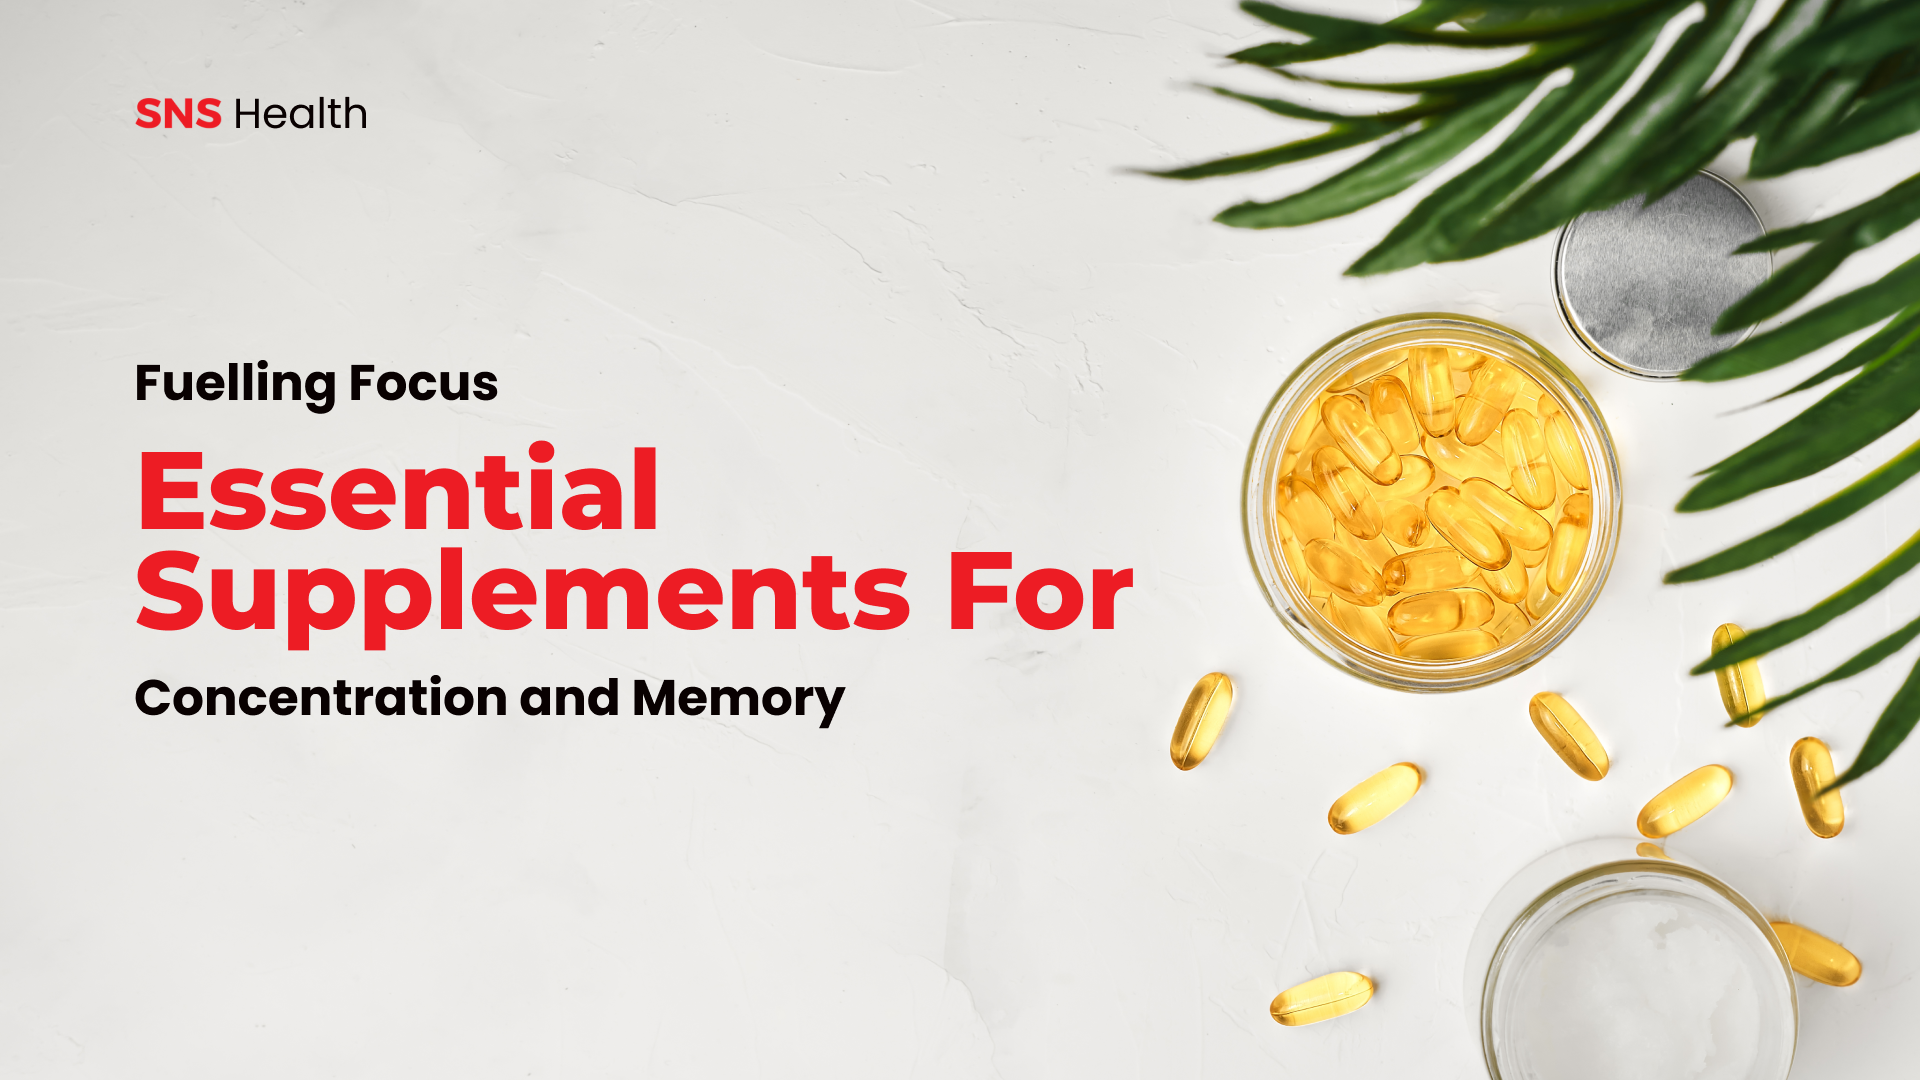 Fuelling Focus: Essential Supplements for Concentration and Memory